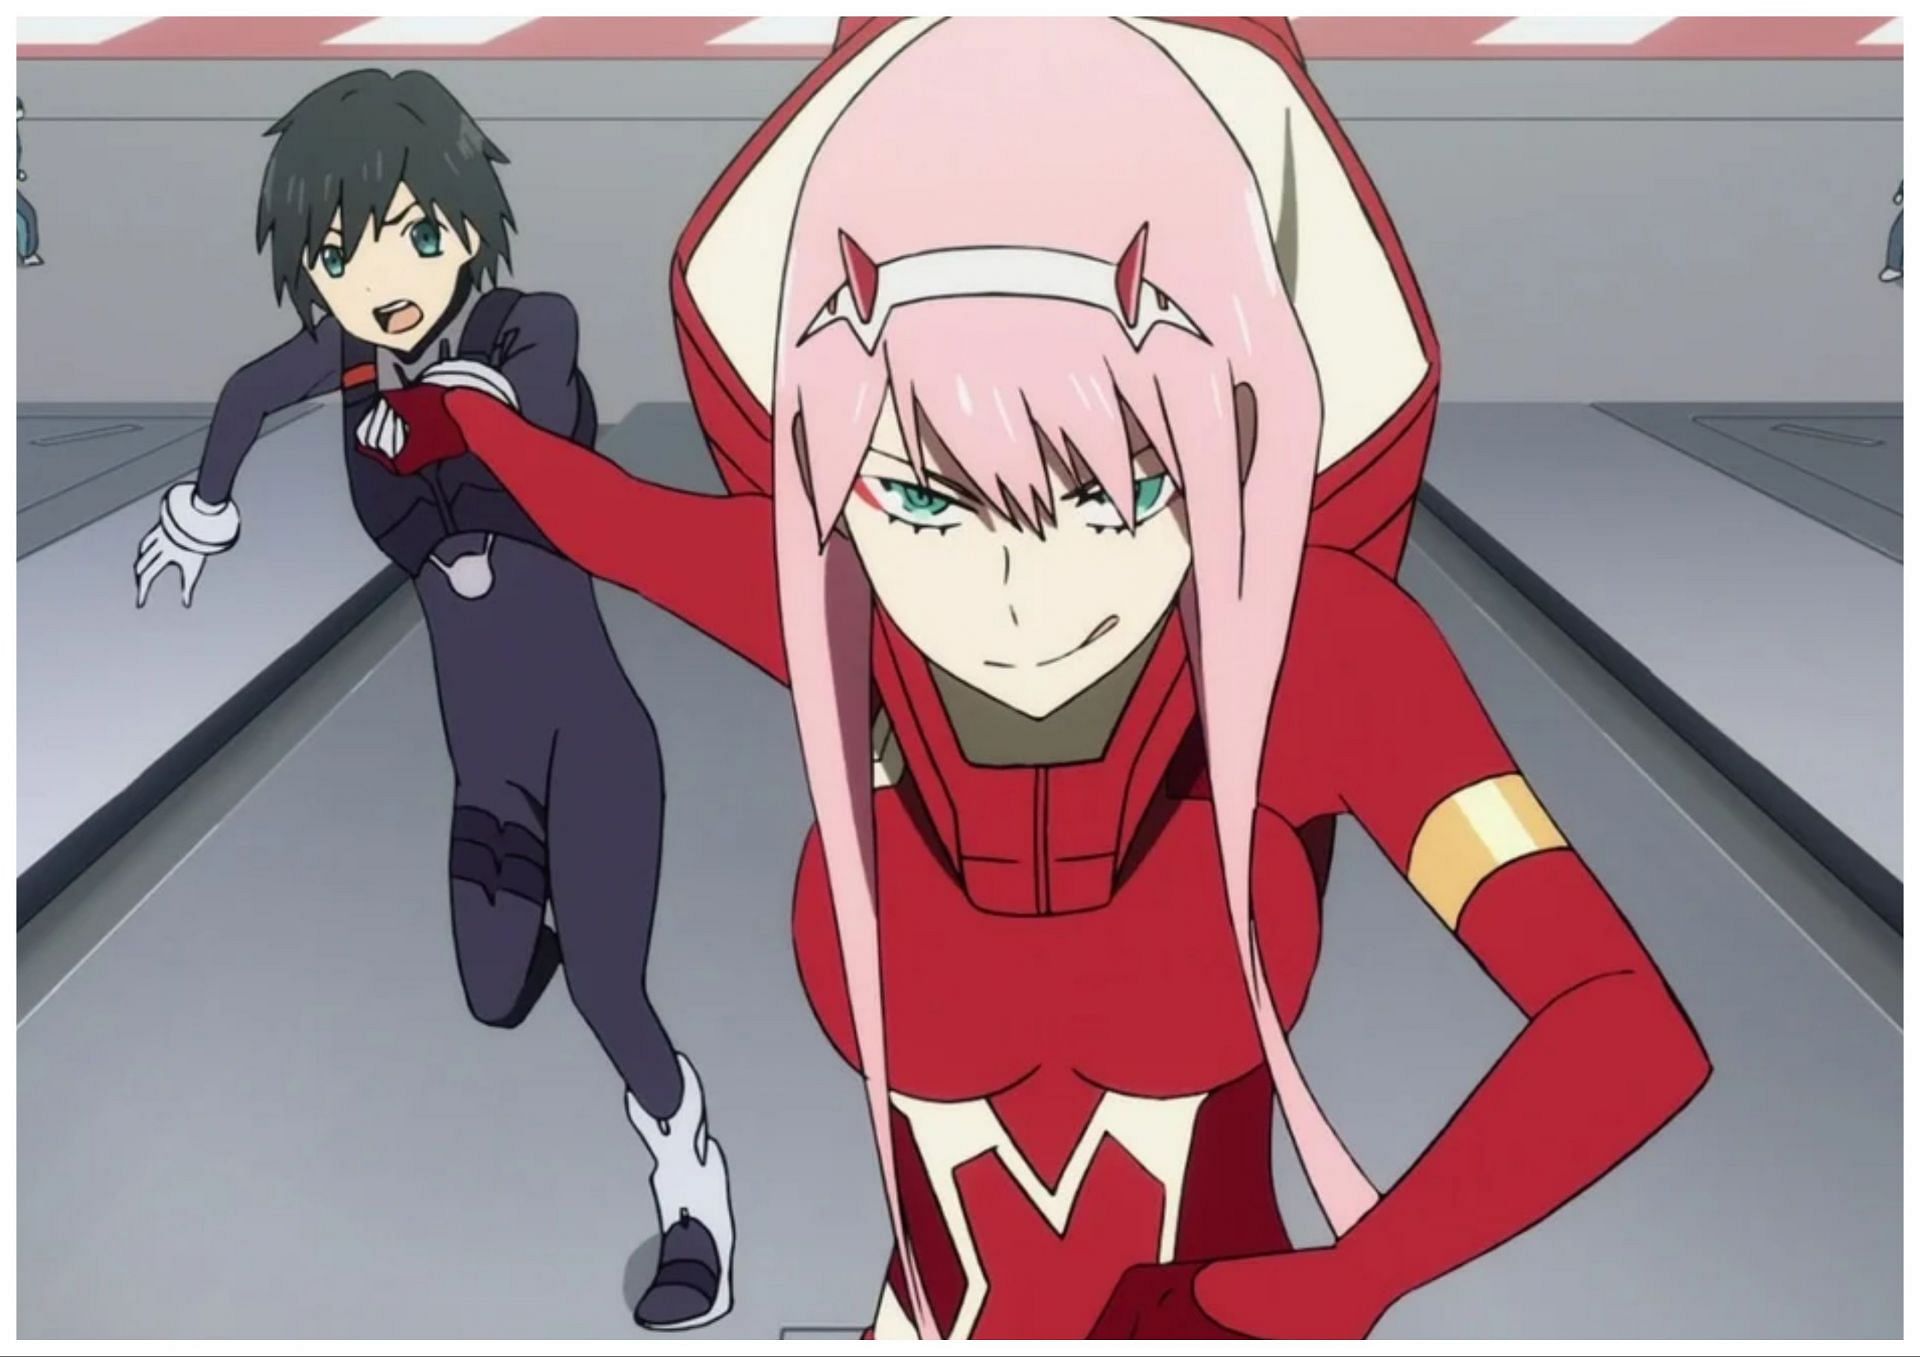 Darling in the Franxx is set in a dark future where humans have left the surface and only remnants of civilization remain (Image via Studio Trigger) 